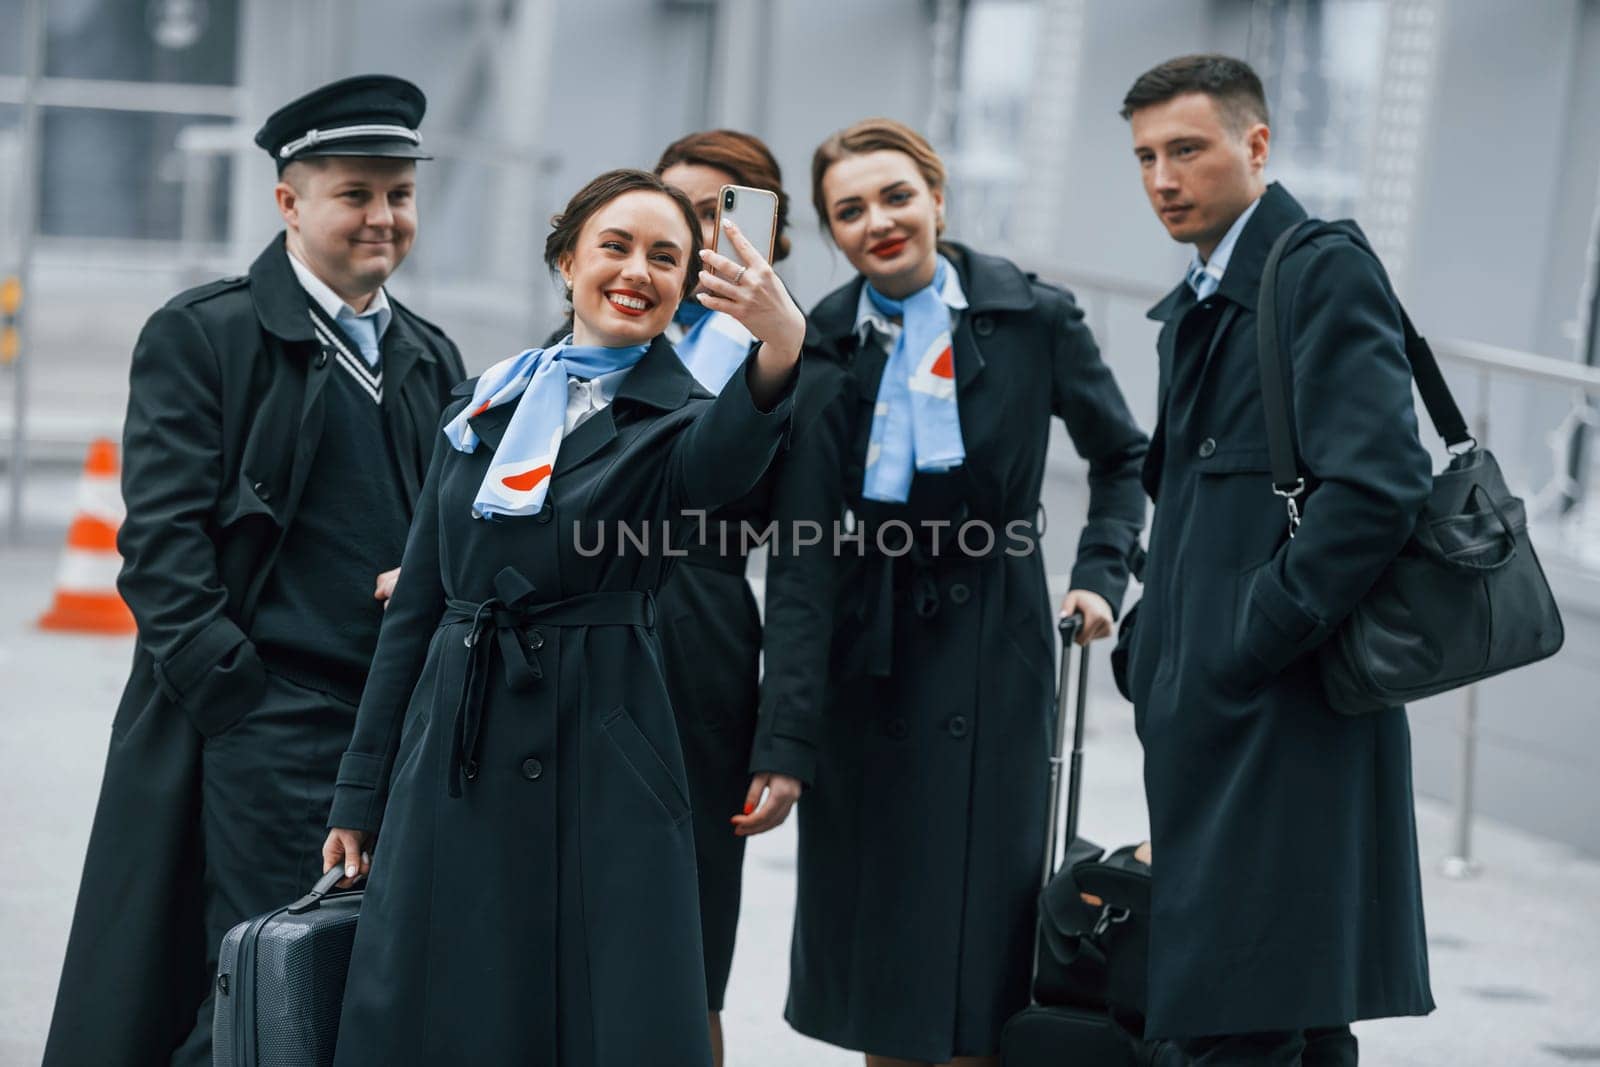 Aircraft crew in work uniform is together outdoors in the airport by Standret